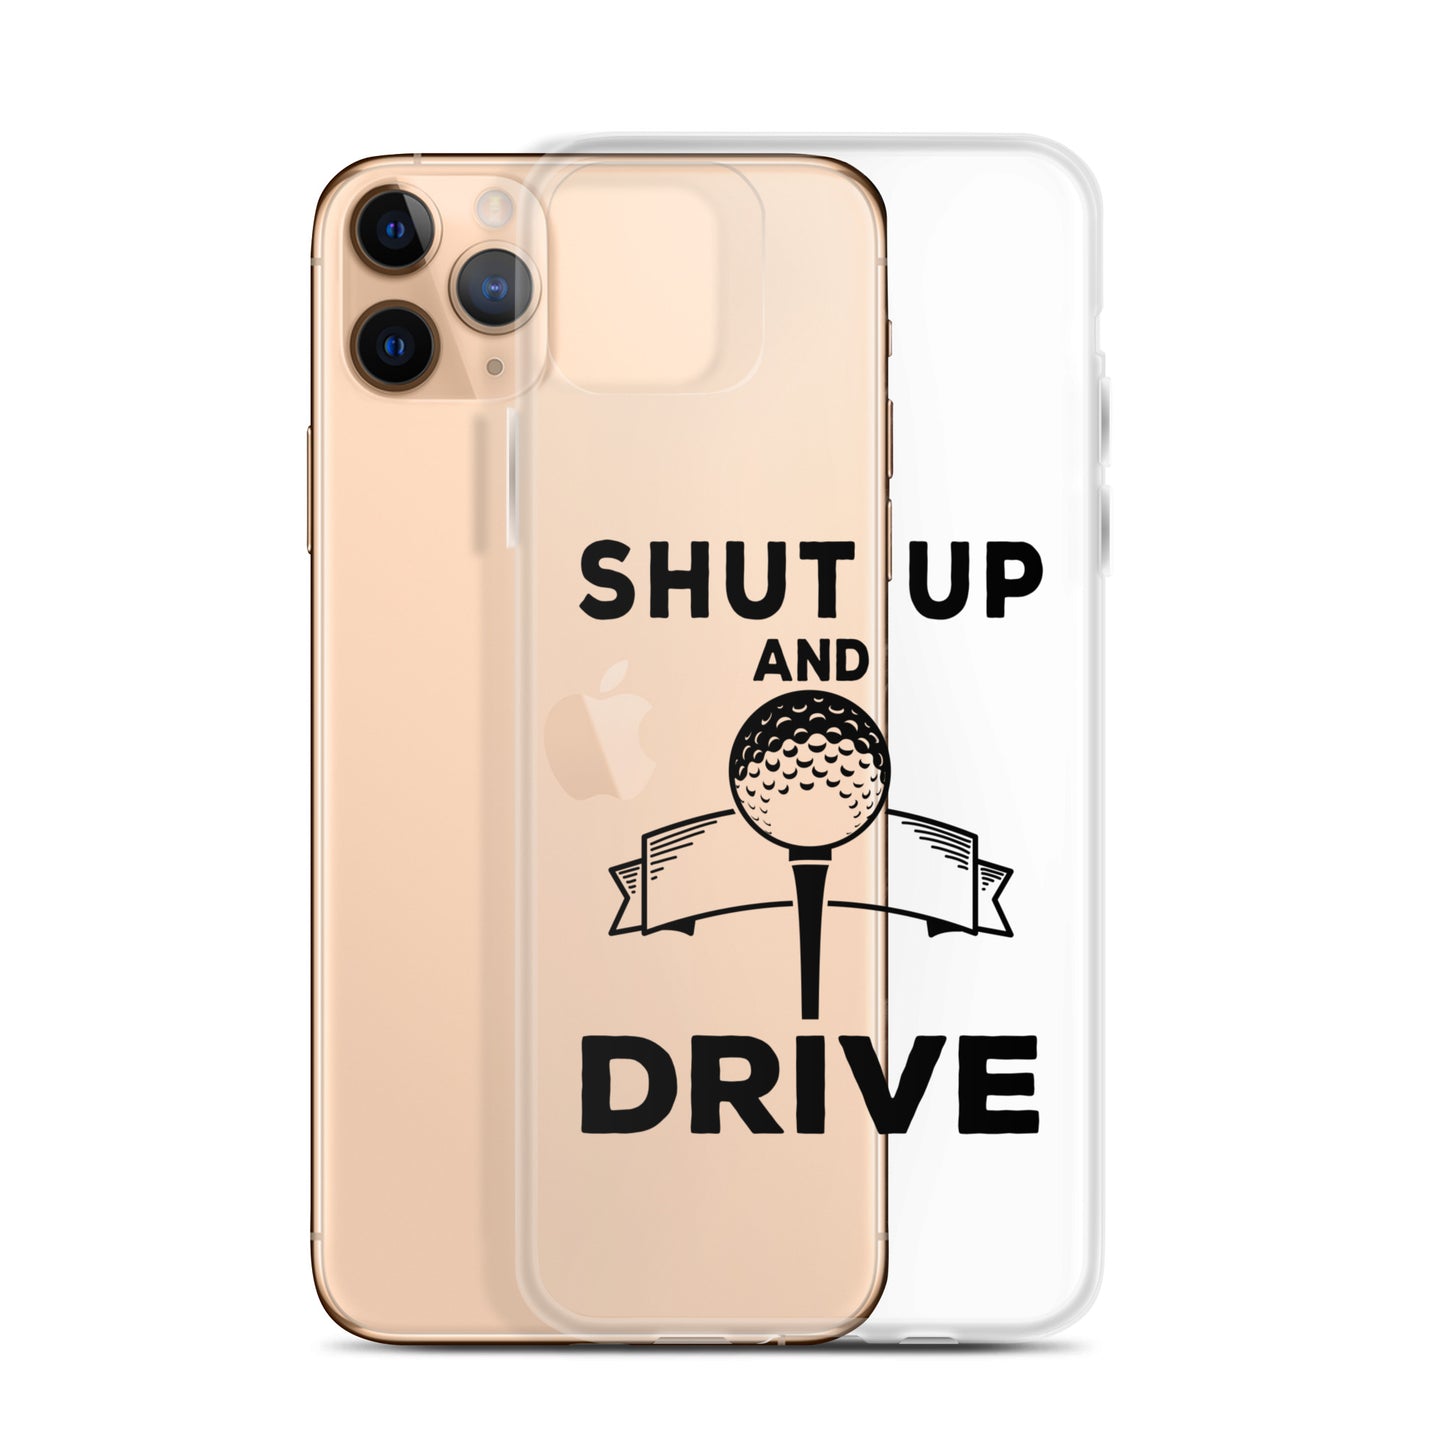 Shut Up and Drive iPhone Case